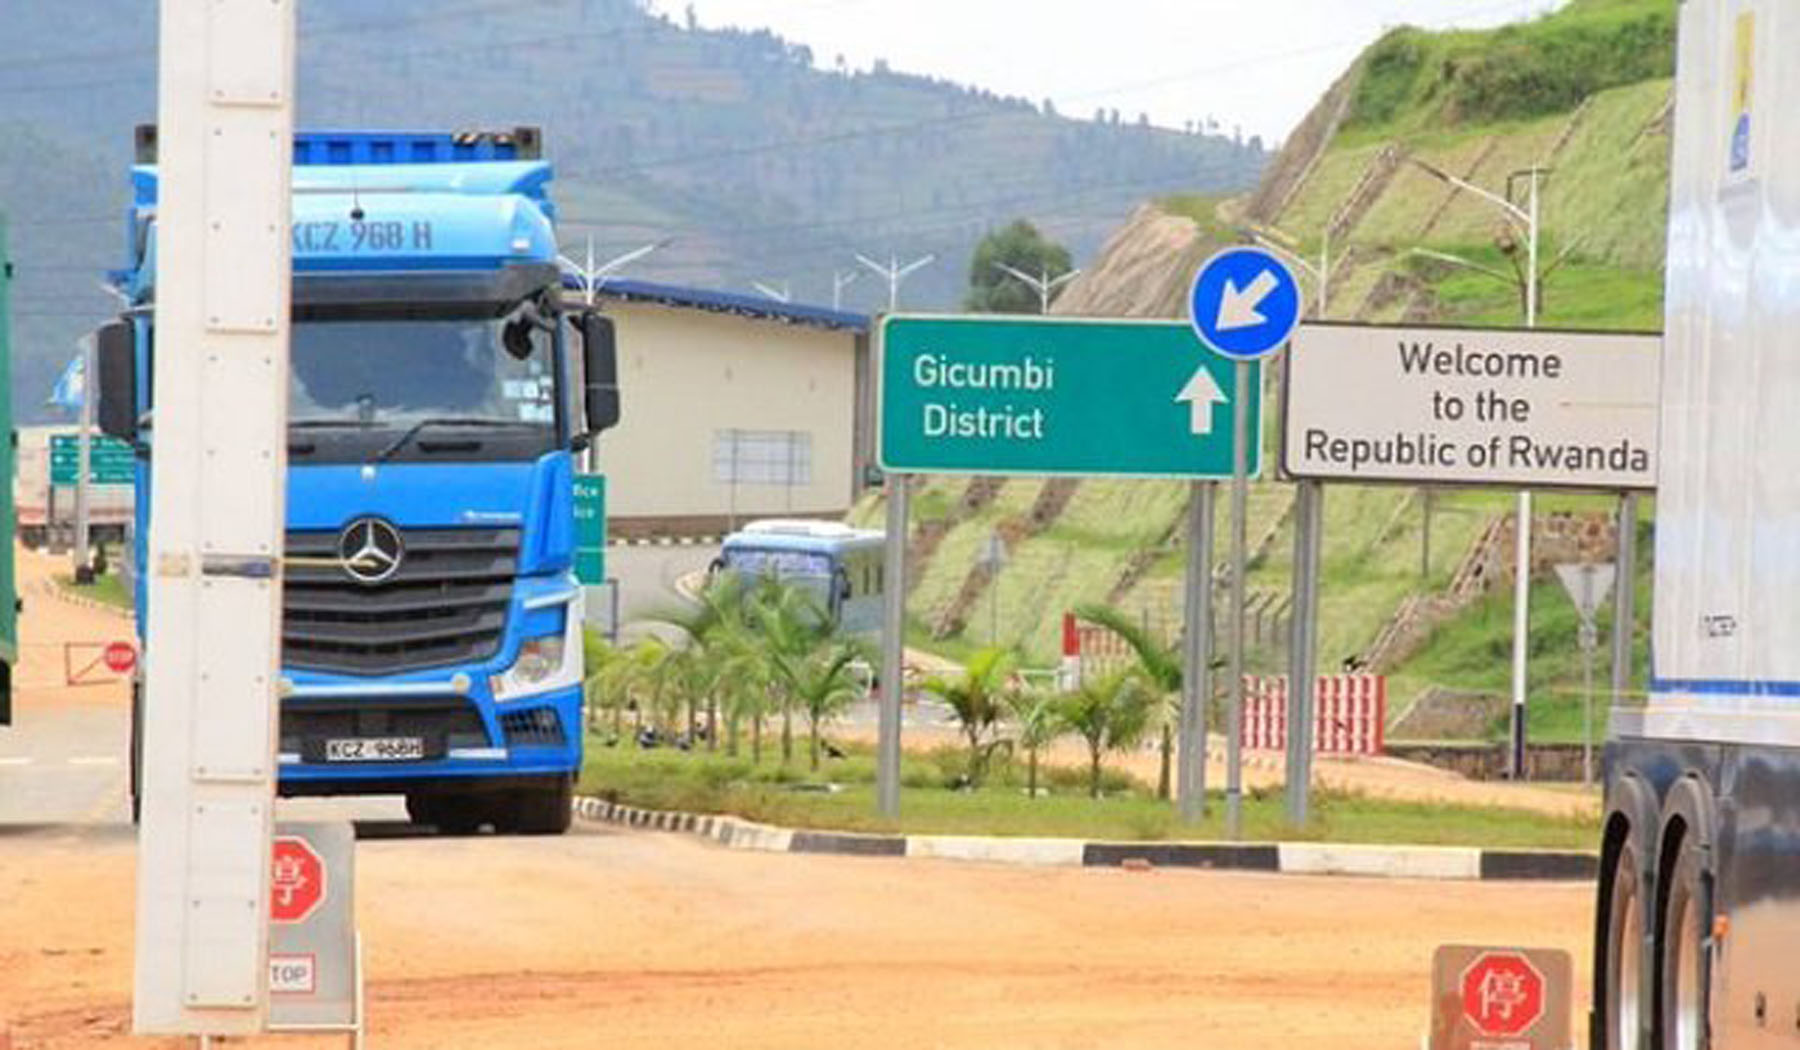 Smuggling of commodities to Uganda from Neighbouring Countries though porous borders worries Authorities.